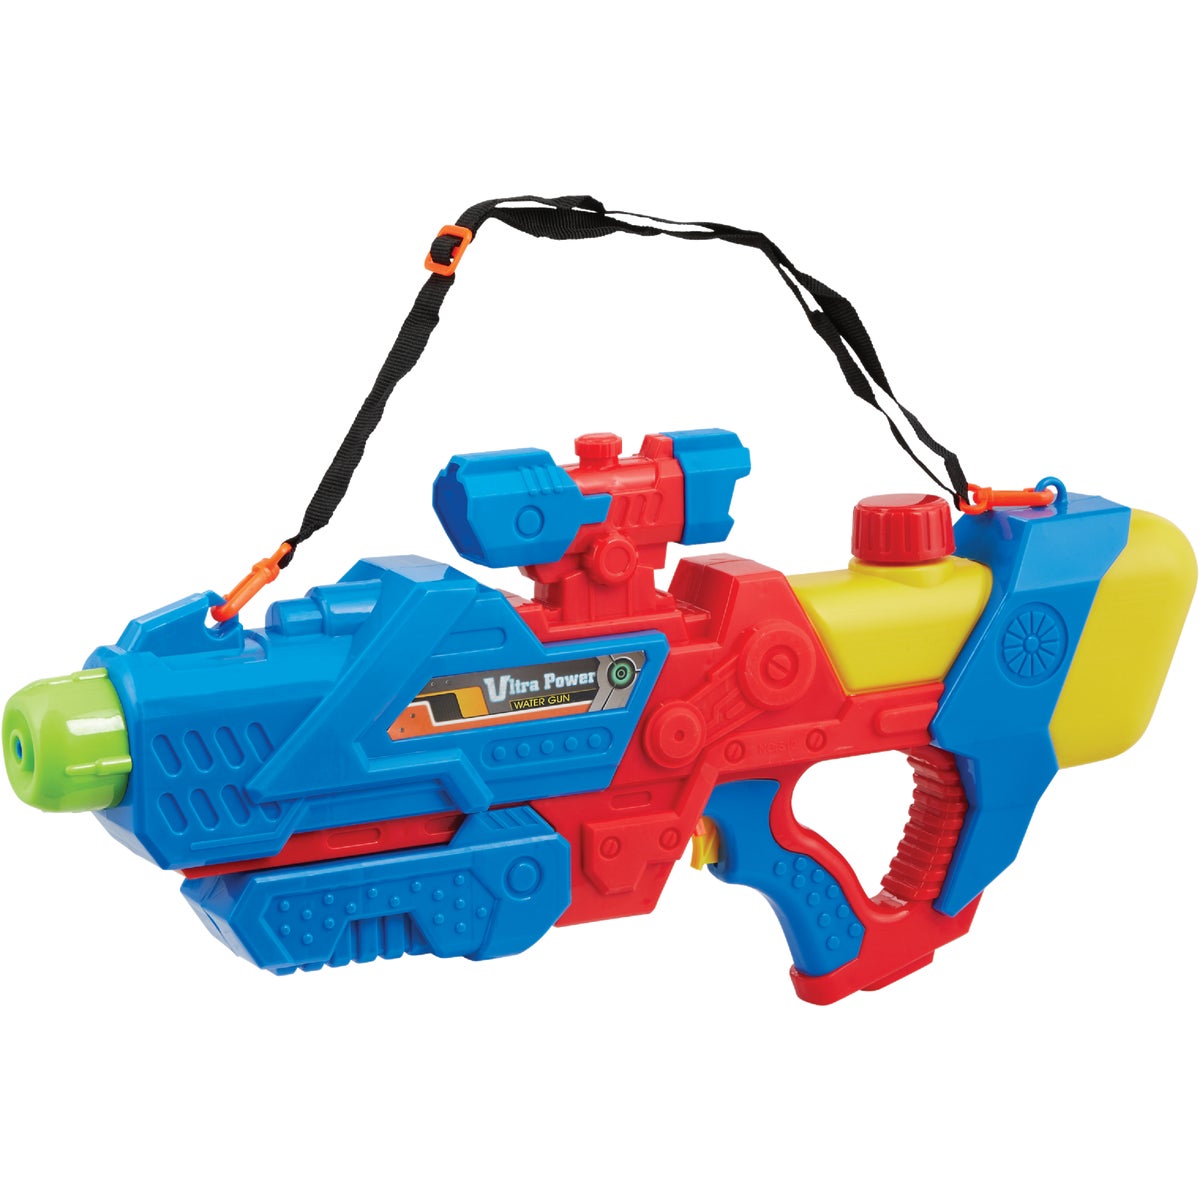 Item 820302, Multiple shot water gun is sure to be a hit with young and older kids alike